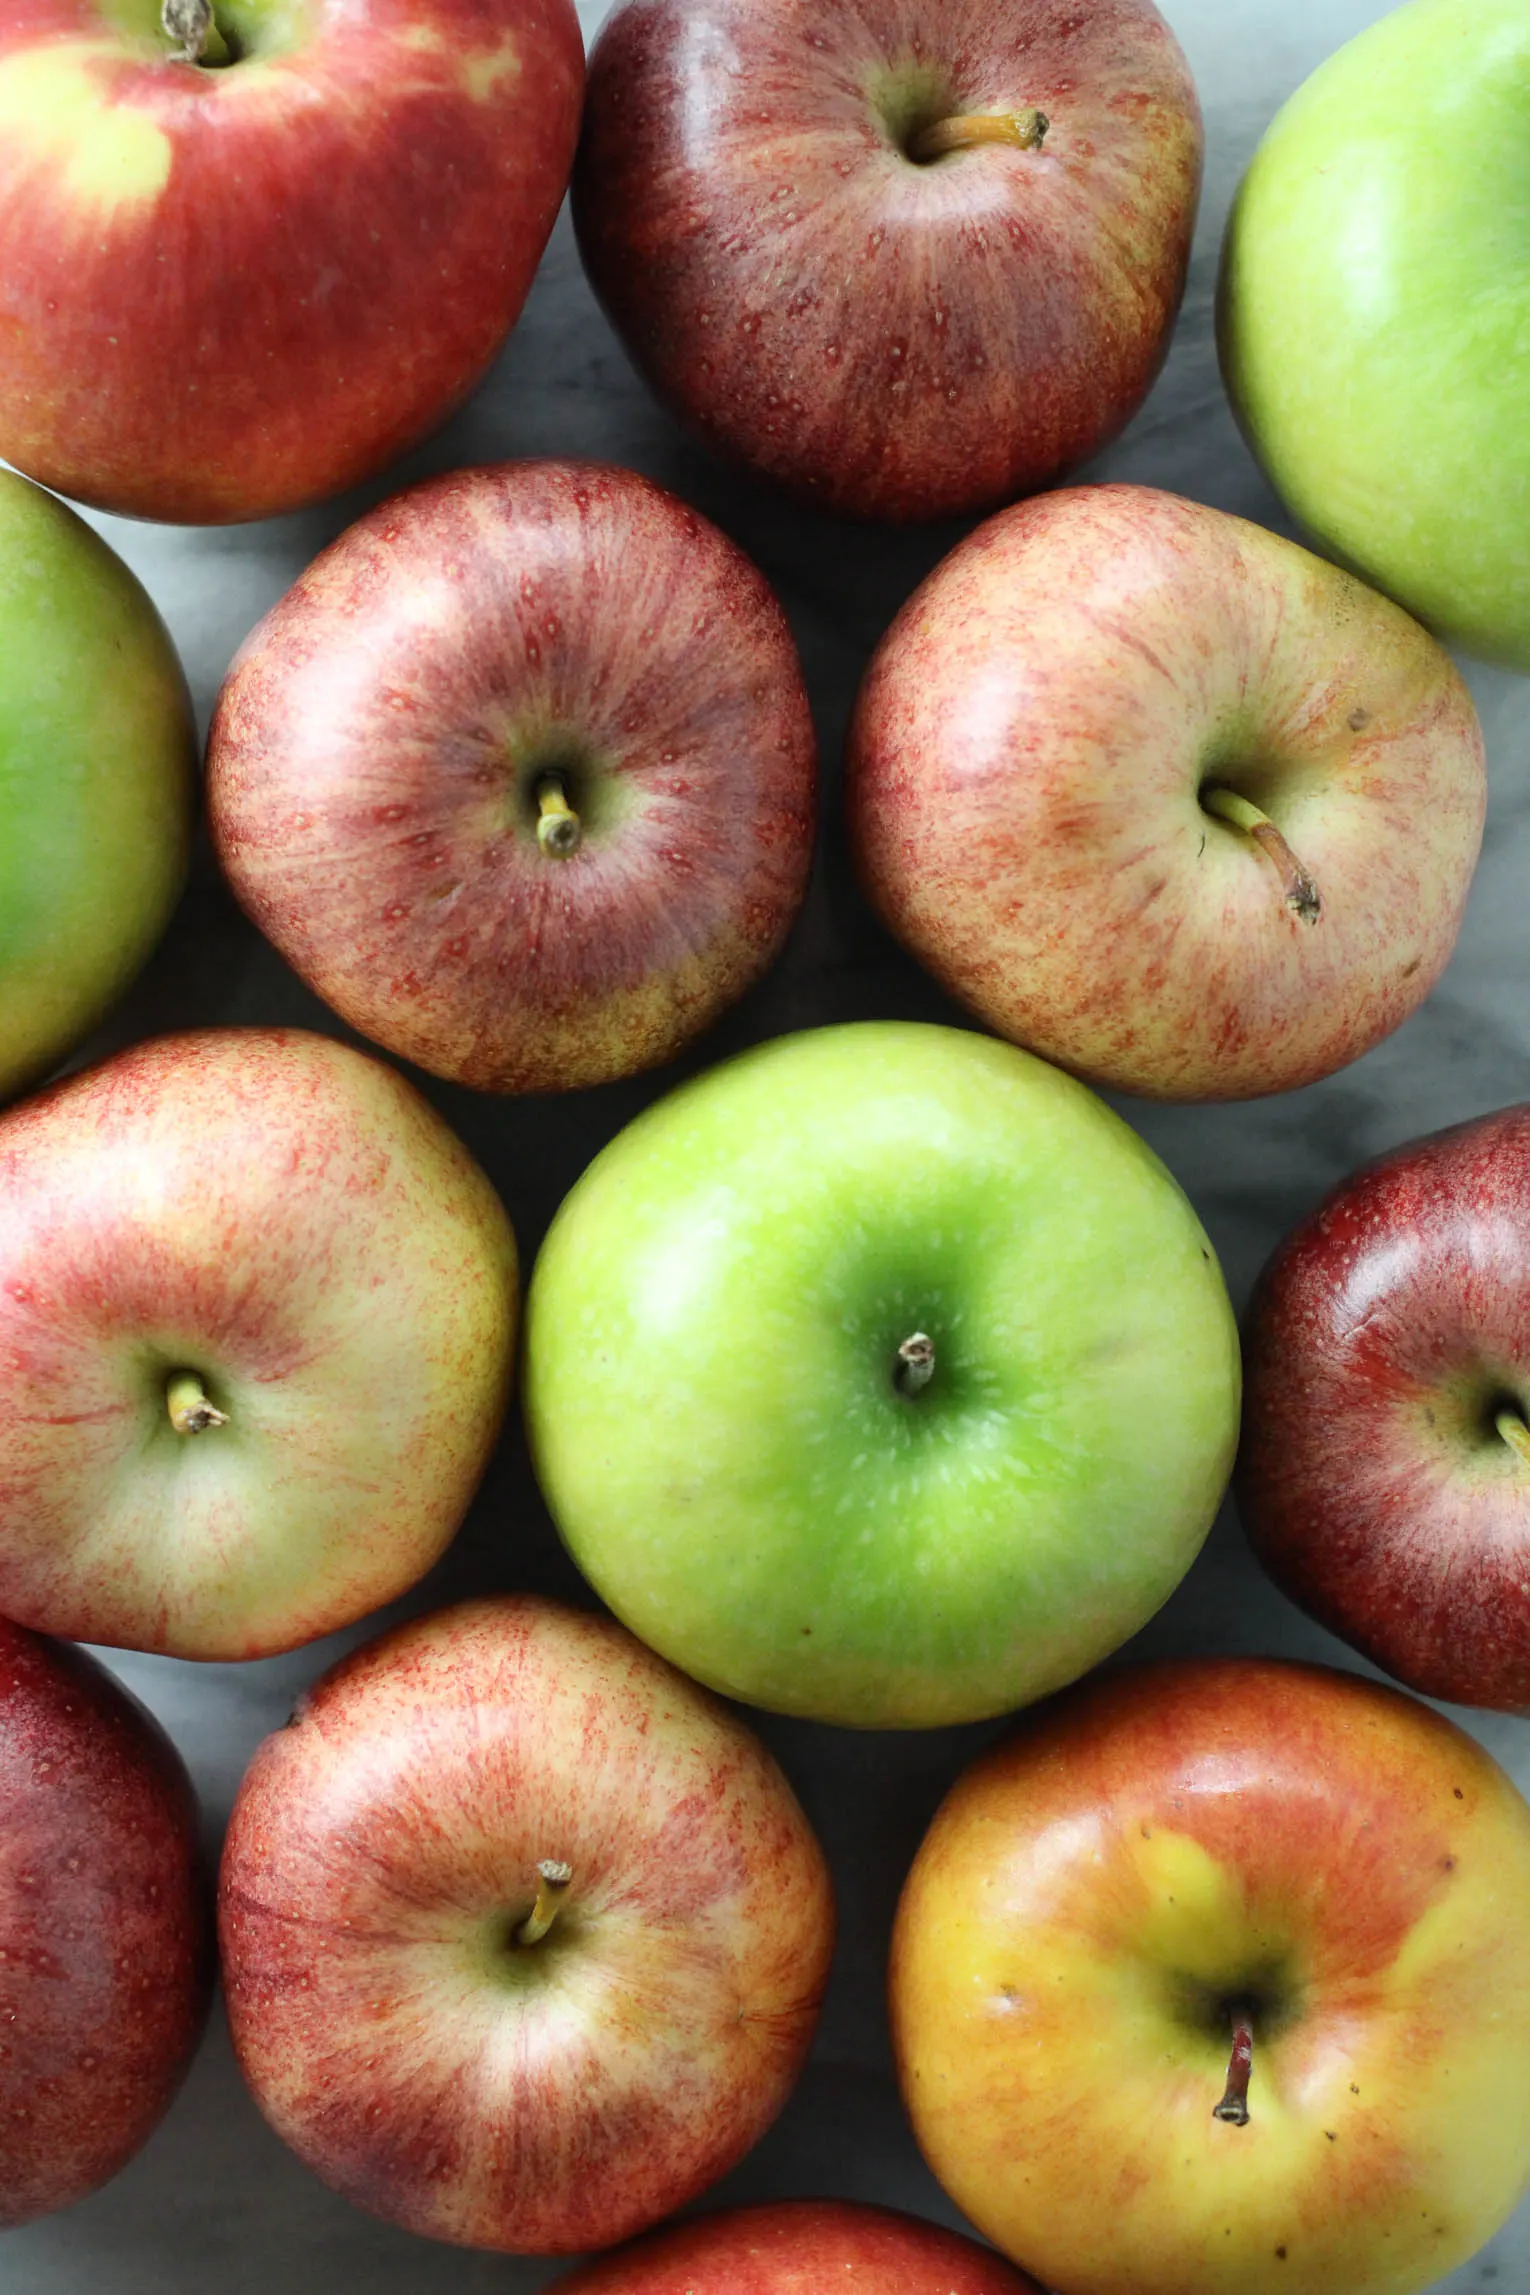 Overhead shot of red, green, and multicolored apples.